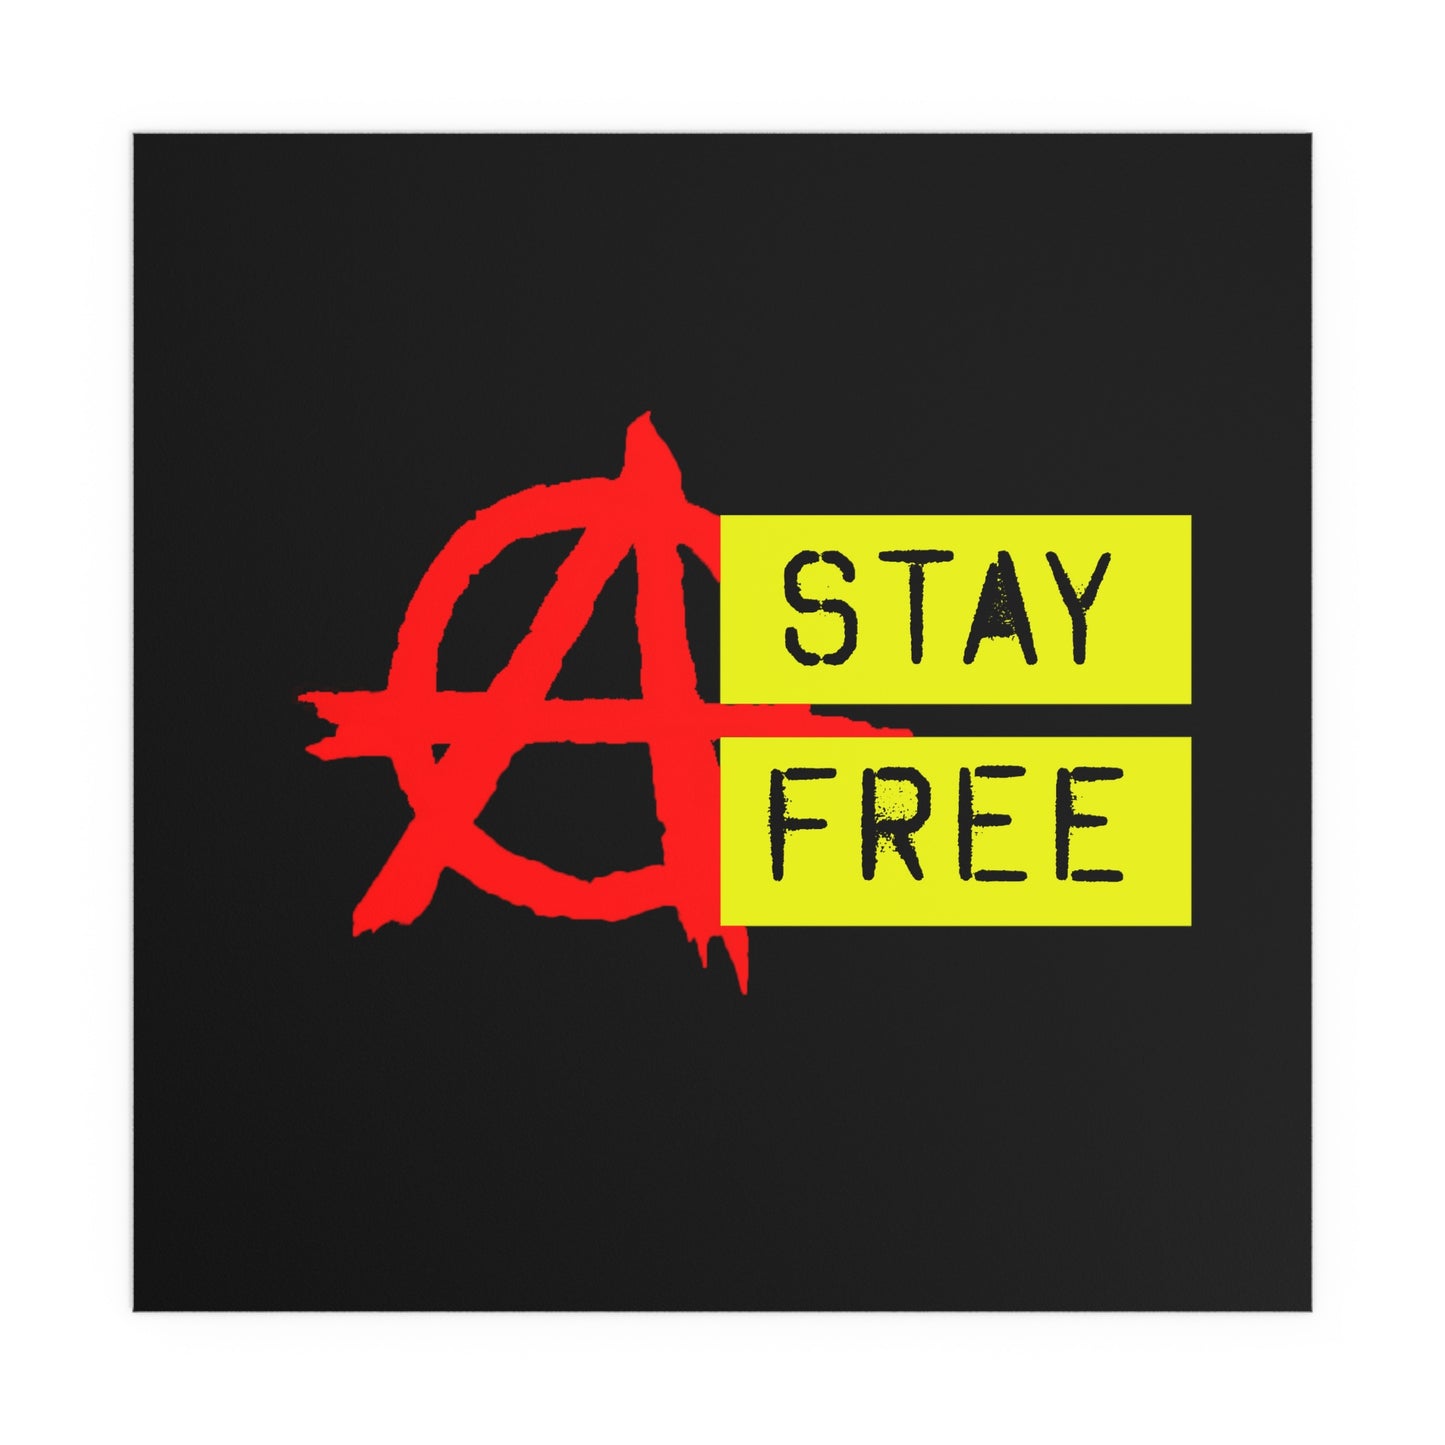 Stay free posters